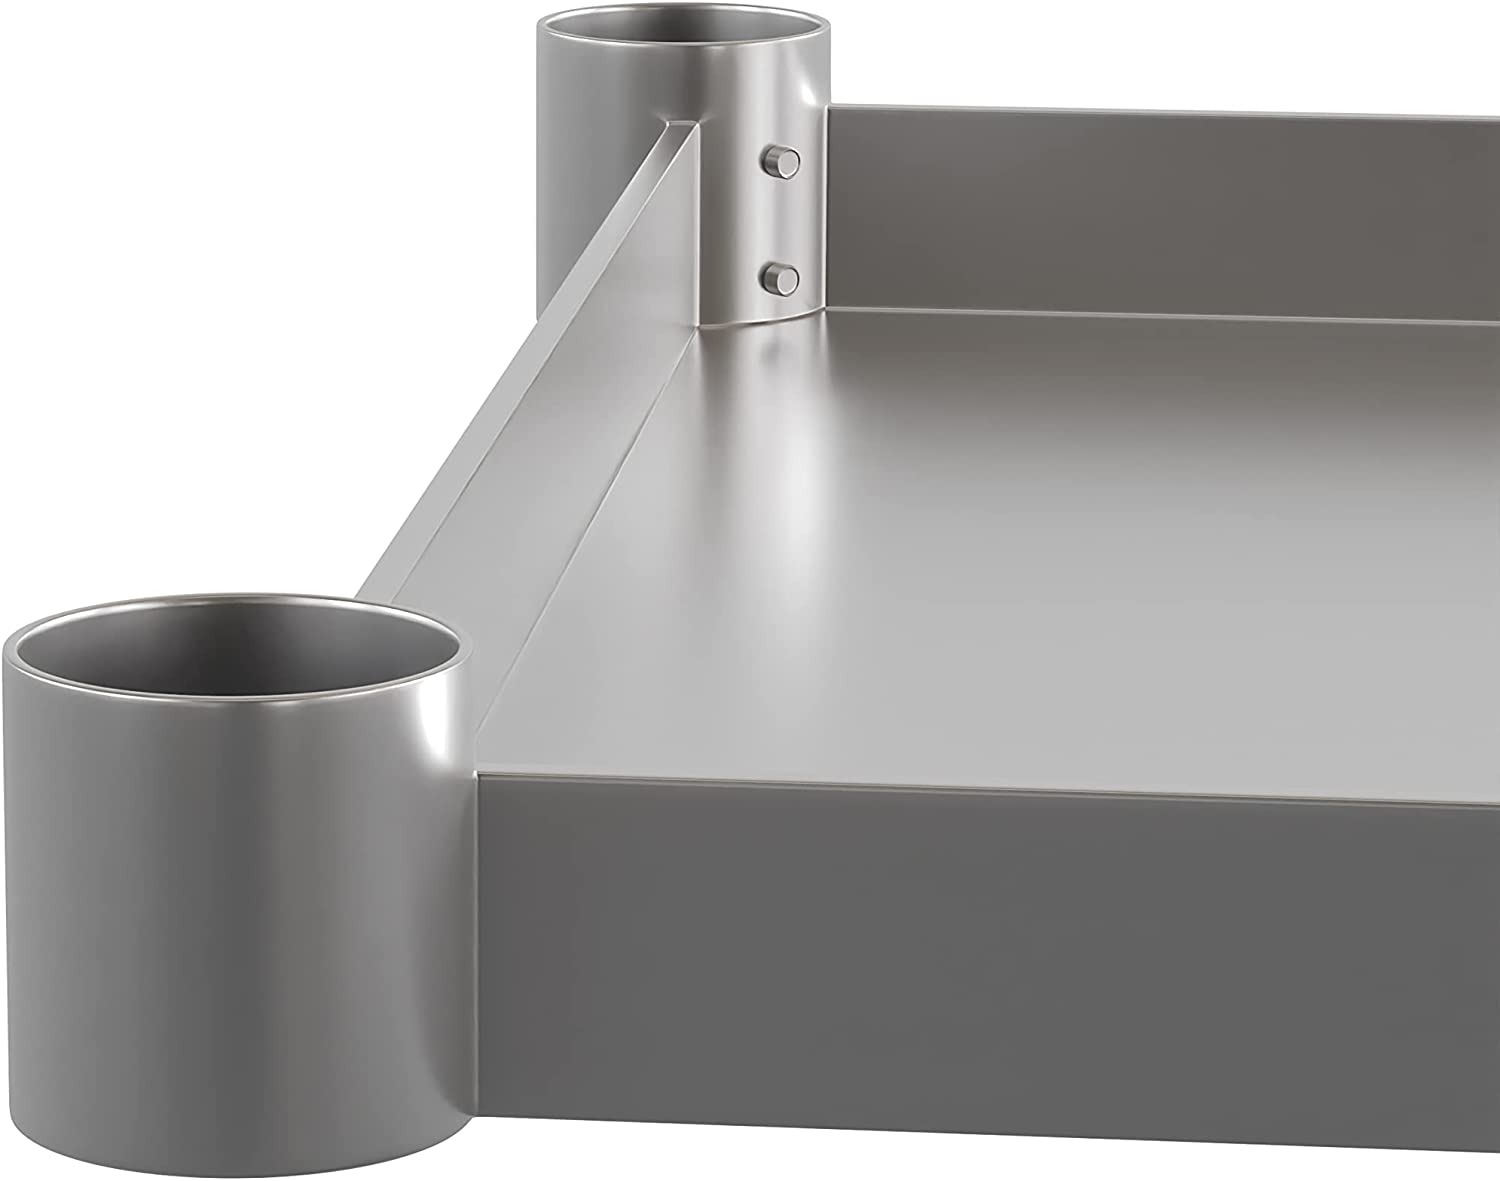 Flash Furniture Galvanized Under Shelf for Prep and Work Tables - Adjustable Lower Shelf for 24" x 60" Stainless Steel Tables